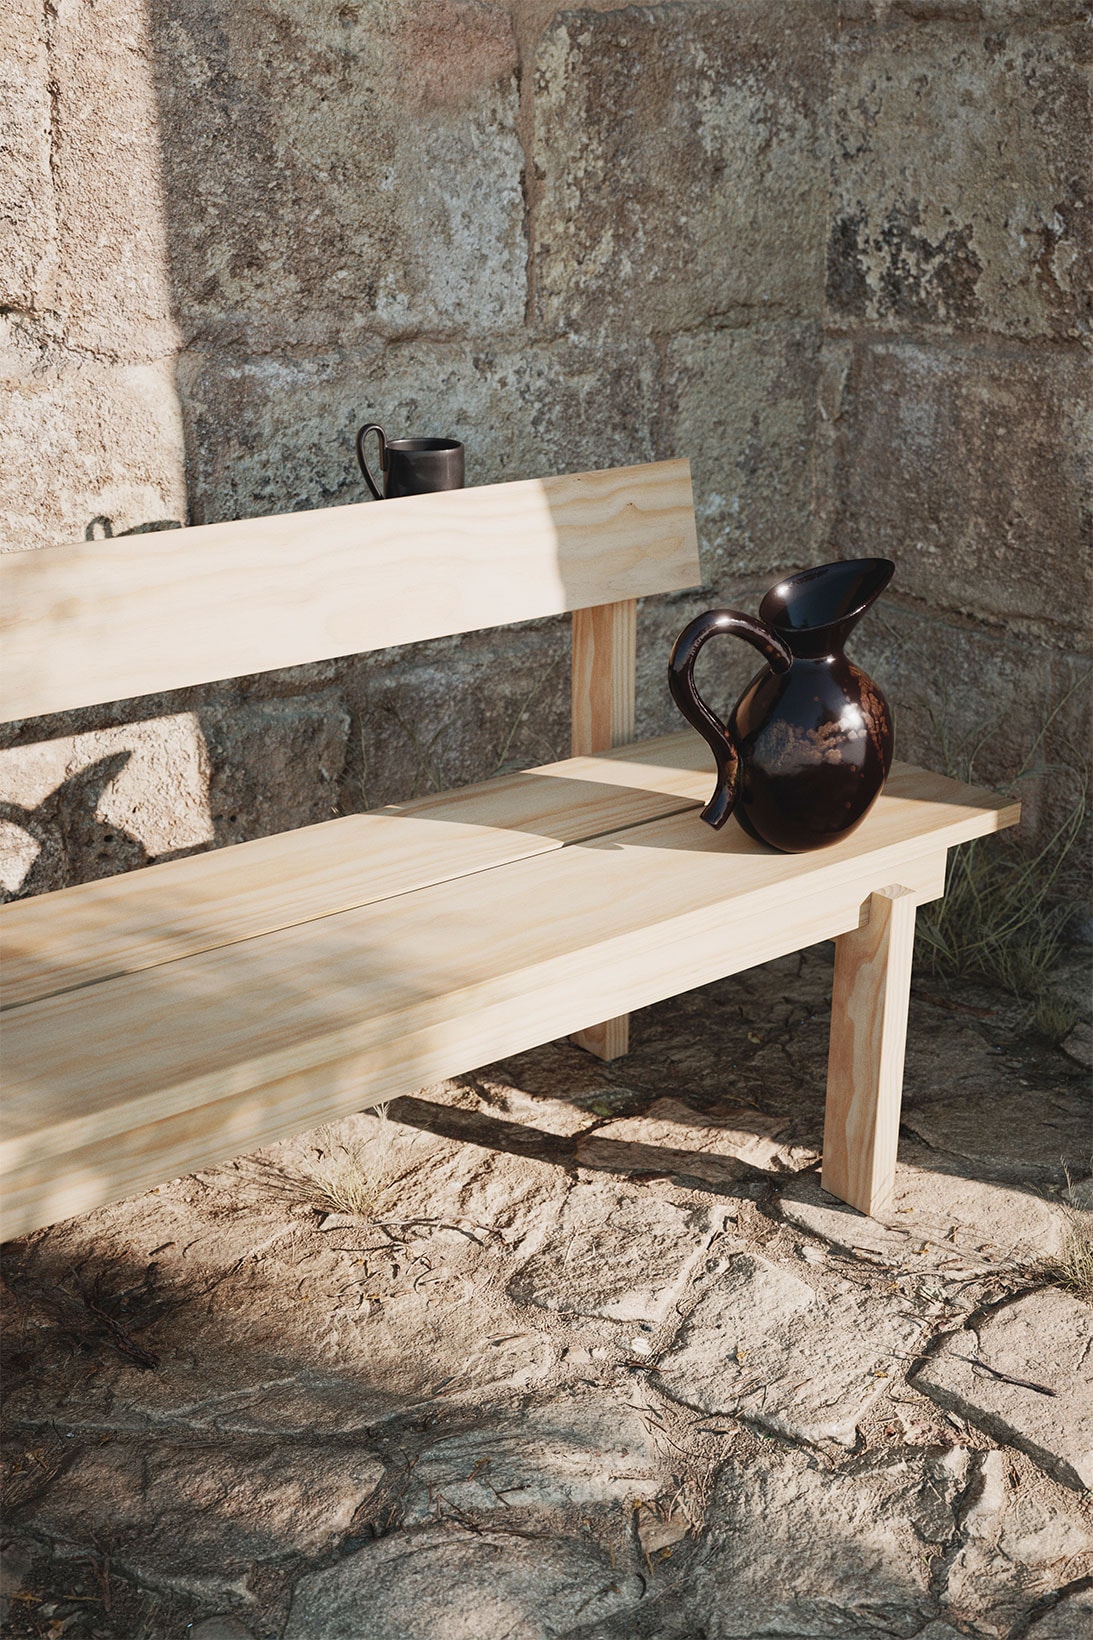 ferm living spring summer ss21 pre collection outdoor poetry furniture homeware lounge chair wood bench watering jug vase